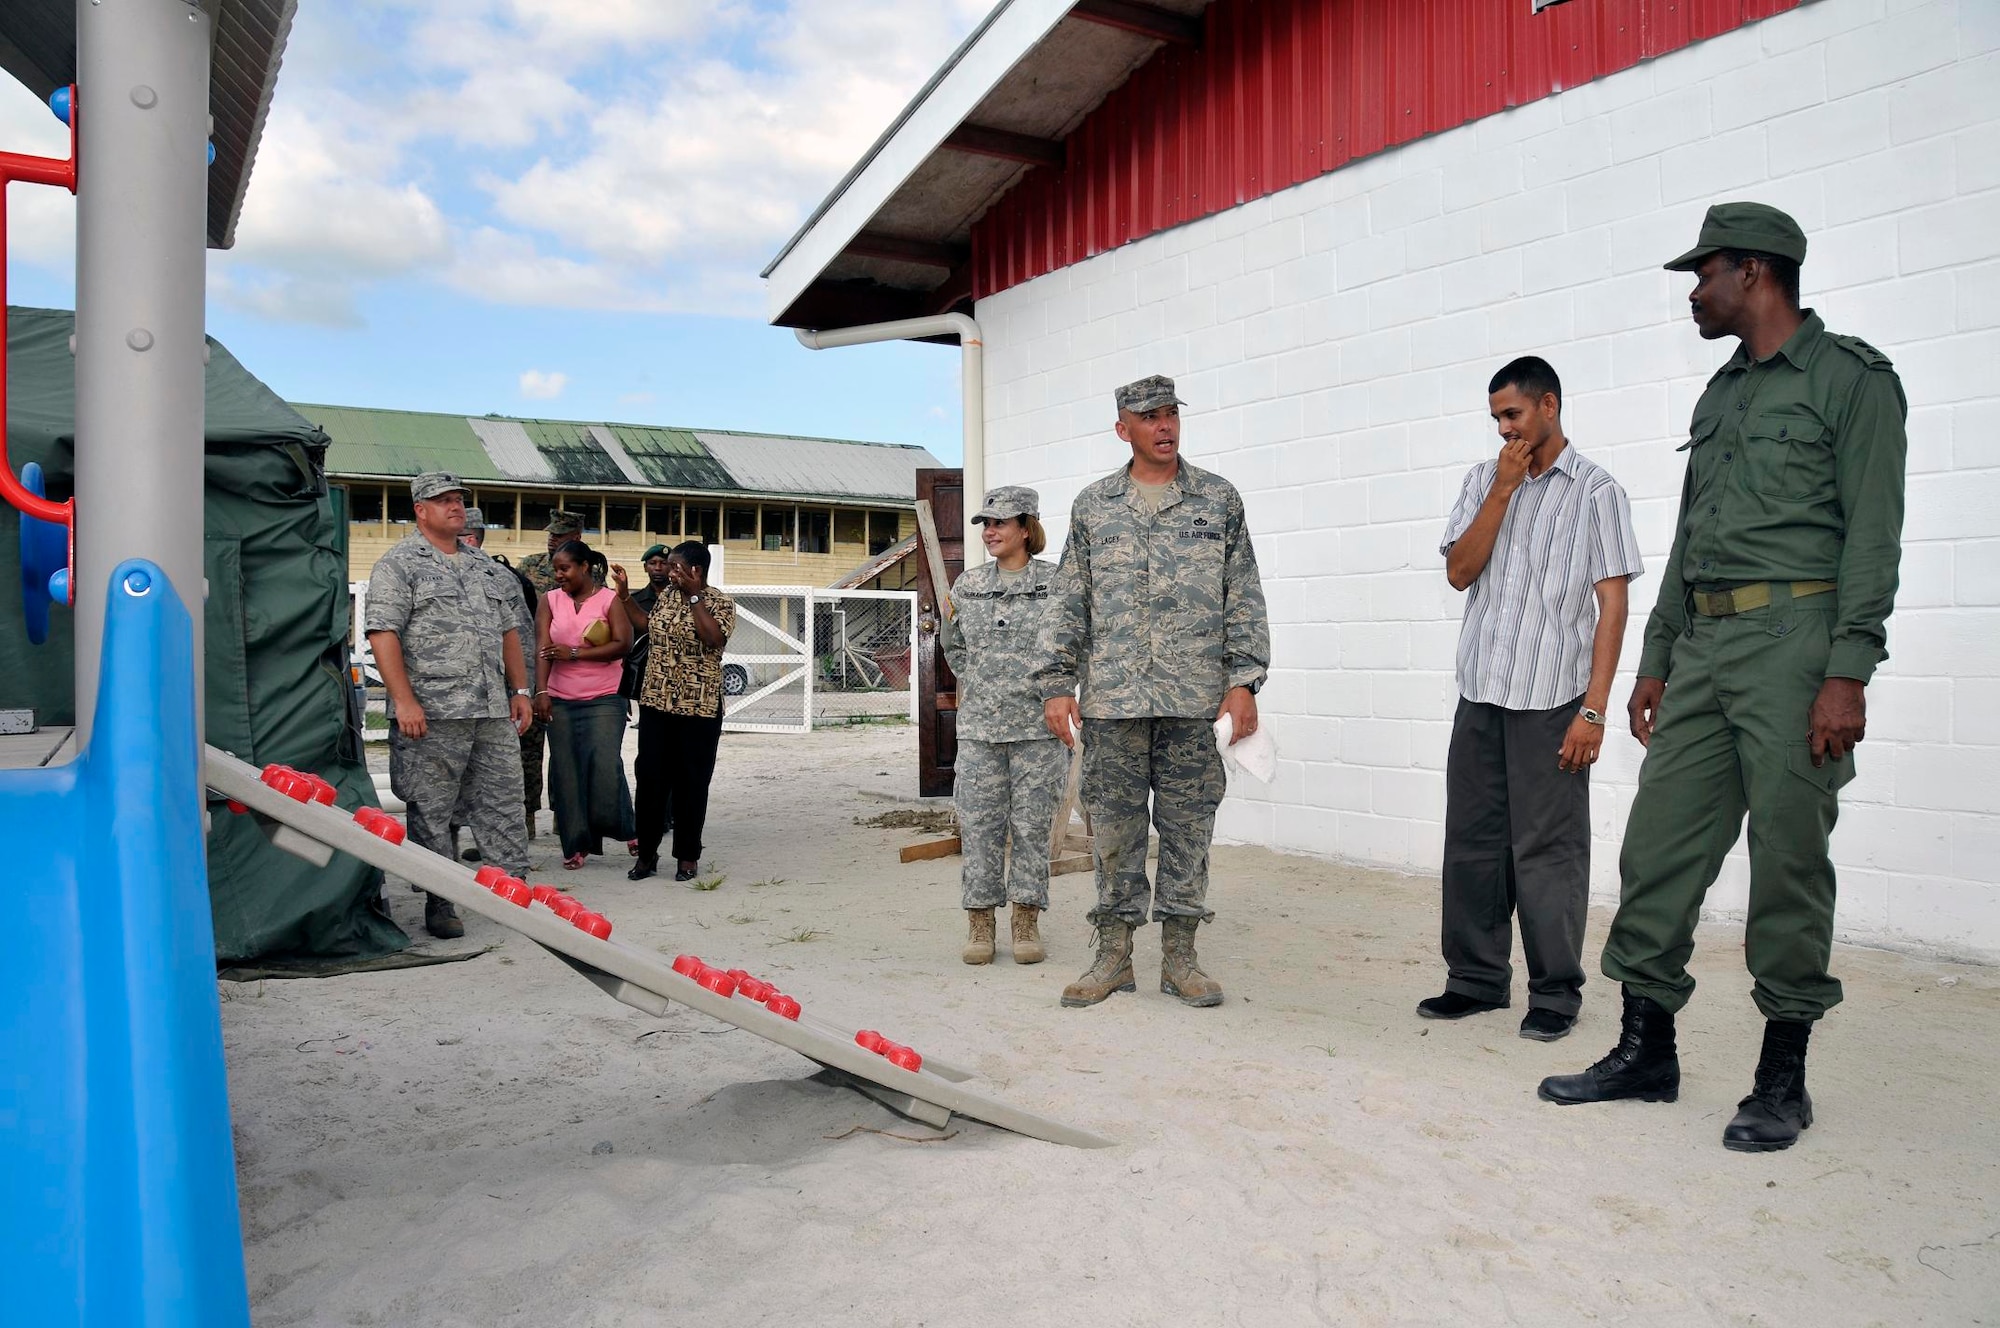 Senior Master Sgt. Scott Lacey, a project manager with the 301st Civil Engineer Squadron, Naval Air Station Joint Reserve Base Fort Worth, Texas, speaks with members of the Guyana Defense Force and Guyana Ministry of Education, during a tour of Timehri Nursery school July 29, 2009 in Georgetown, Guyana. Sergeant Lacey and his Airmen recently completed renovations to the school house, which included two playground sets, new septic system, and repainting the outside and inside of the building. (U.S. Air Force photo by Airman 1st Class Perry Aston) (Released)